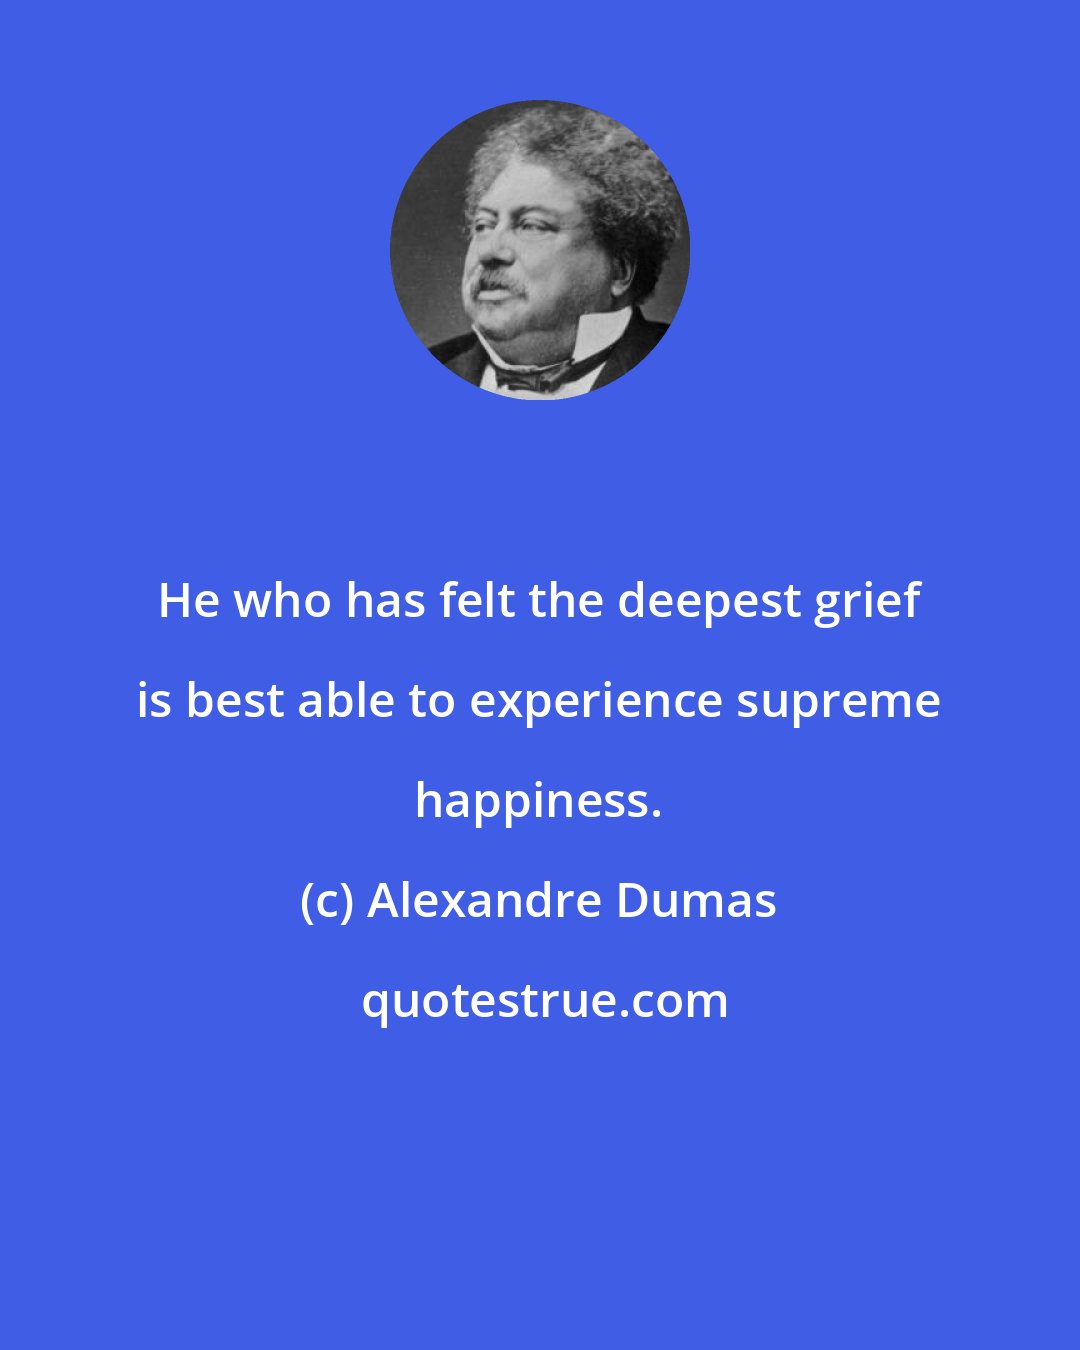 Alexandre Dumas: He who has felt the deepest grief is best able to experience supreme happiness.